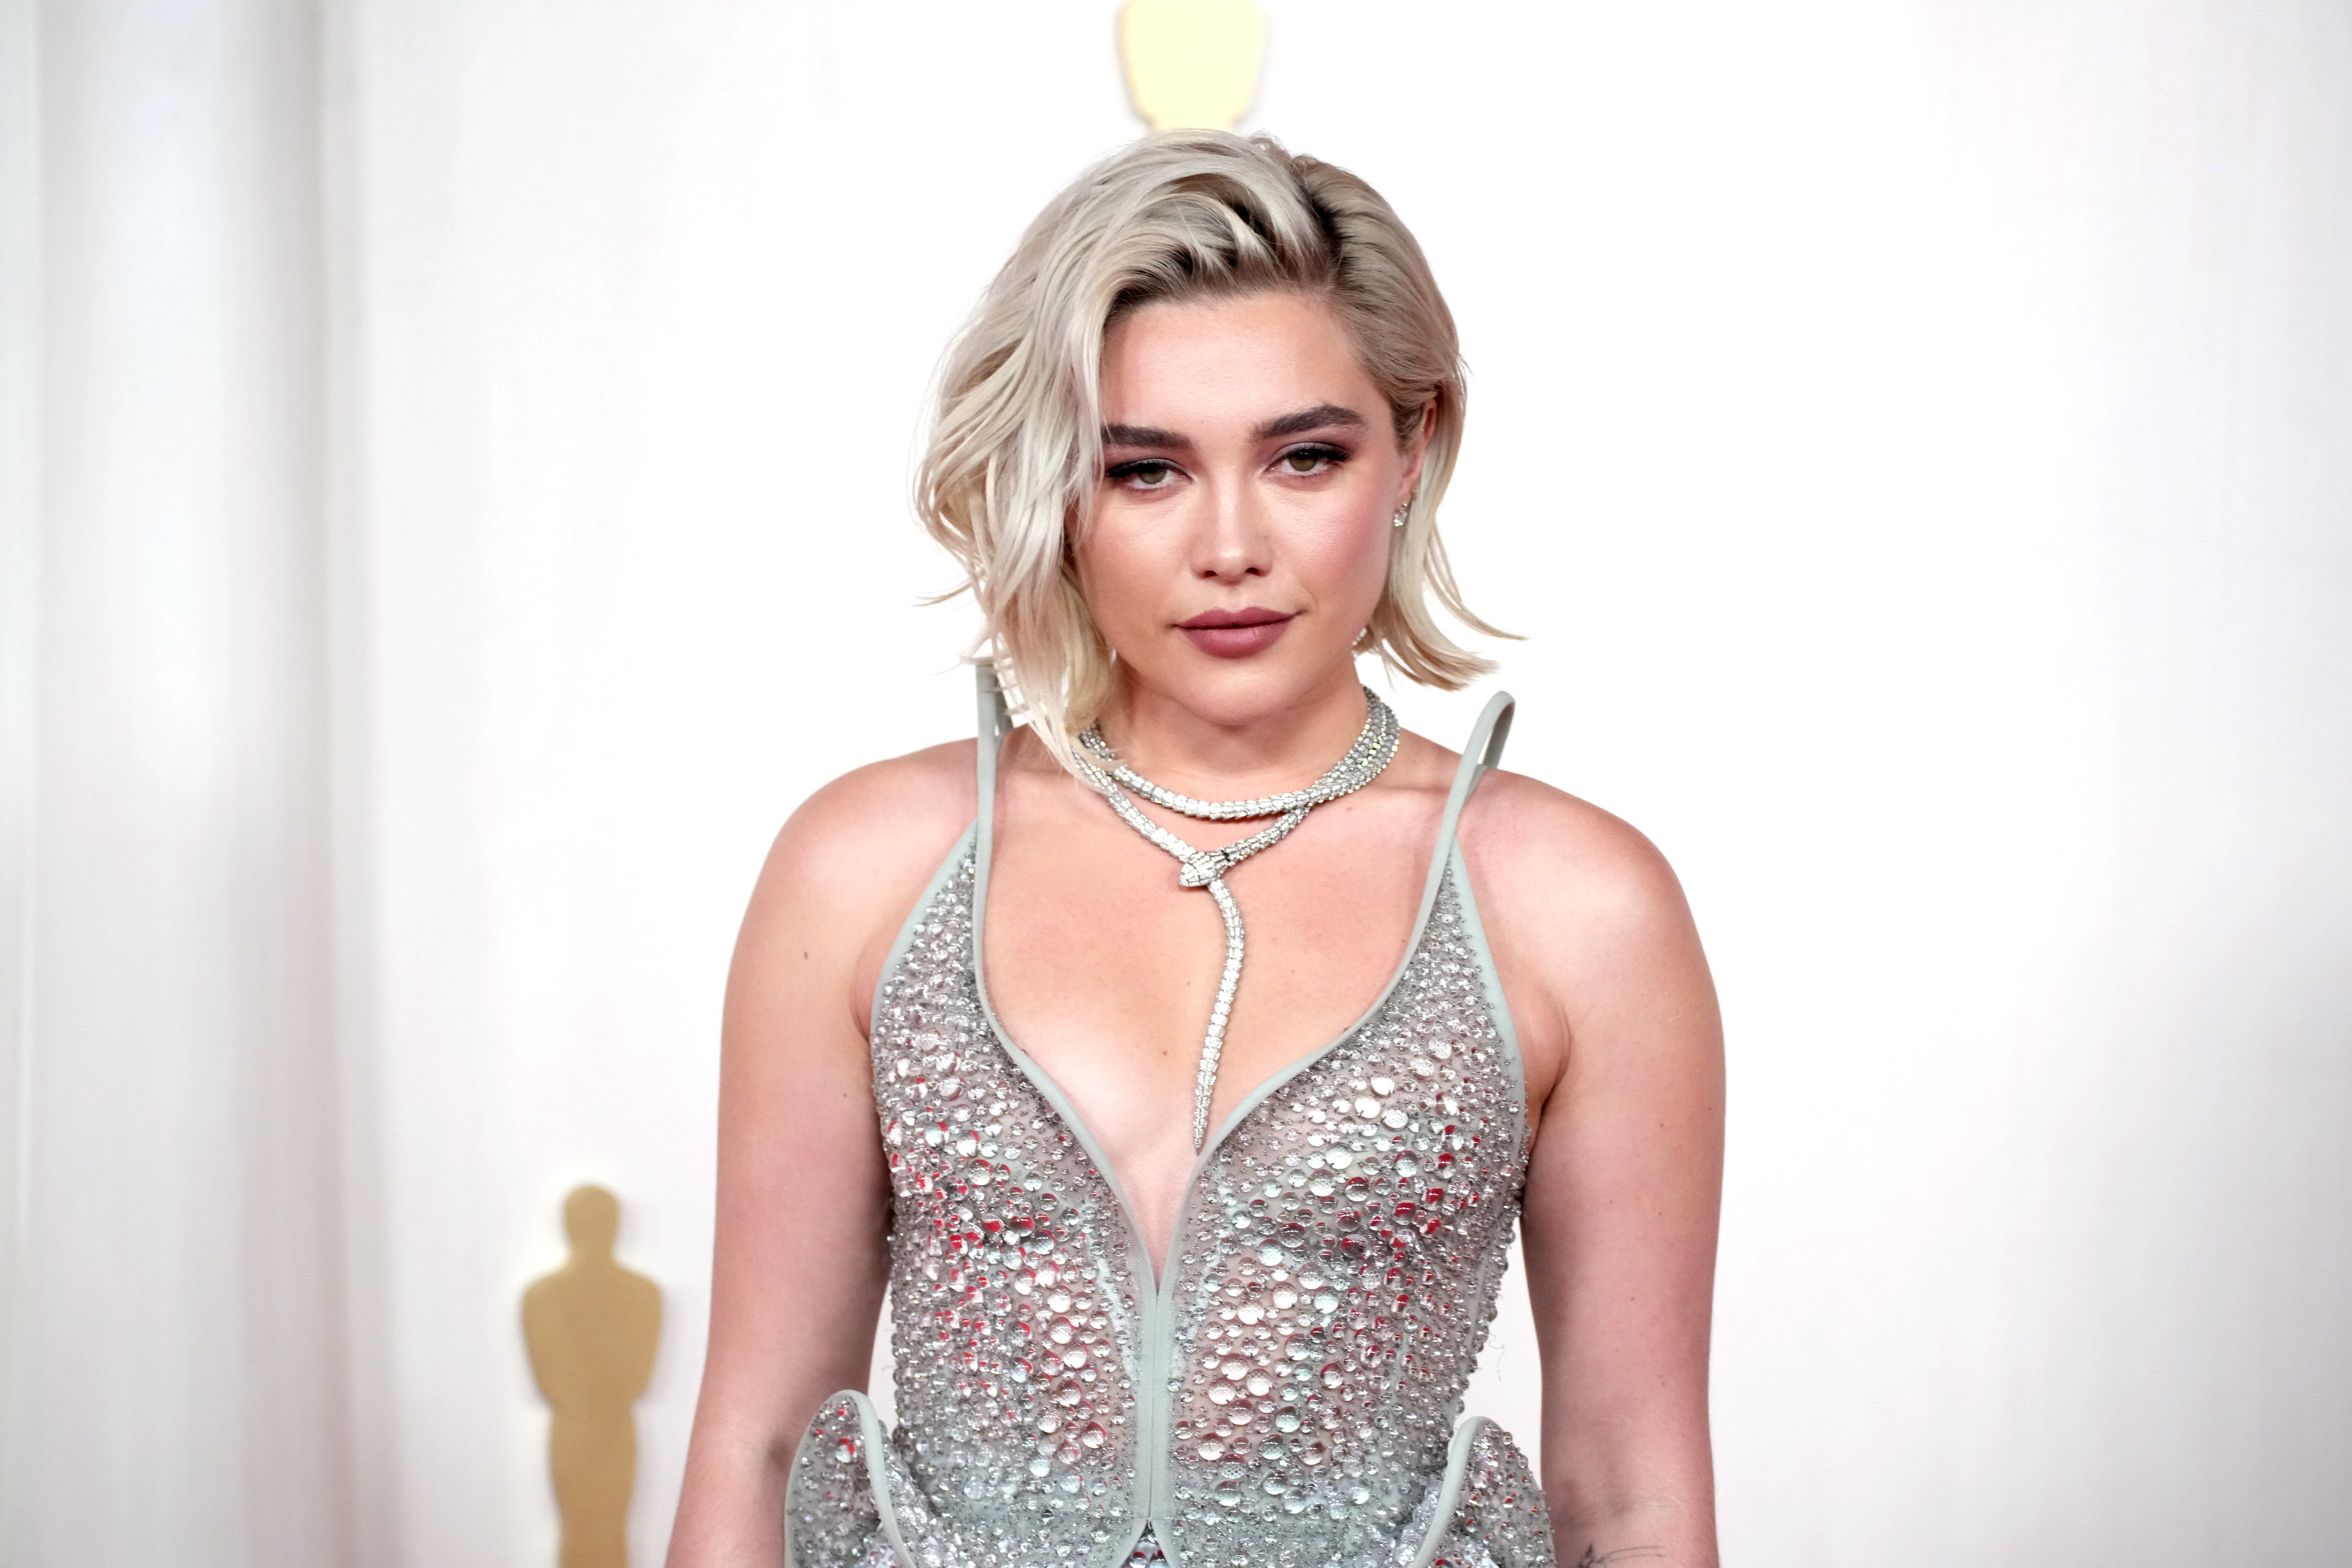 Florence Pugh on the Oscars red carpet